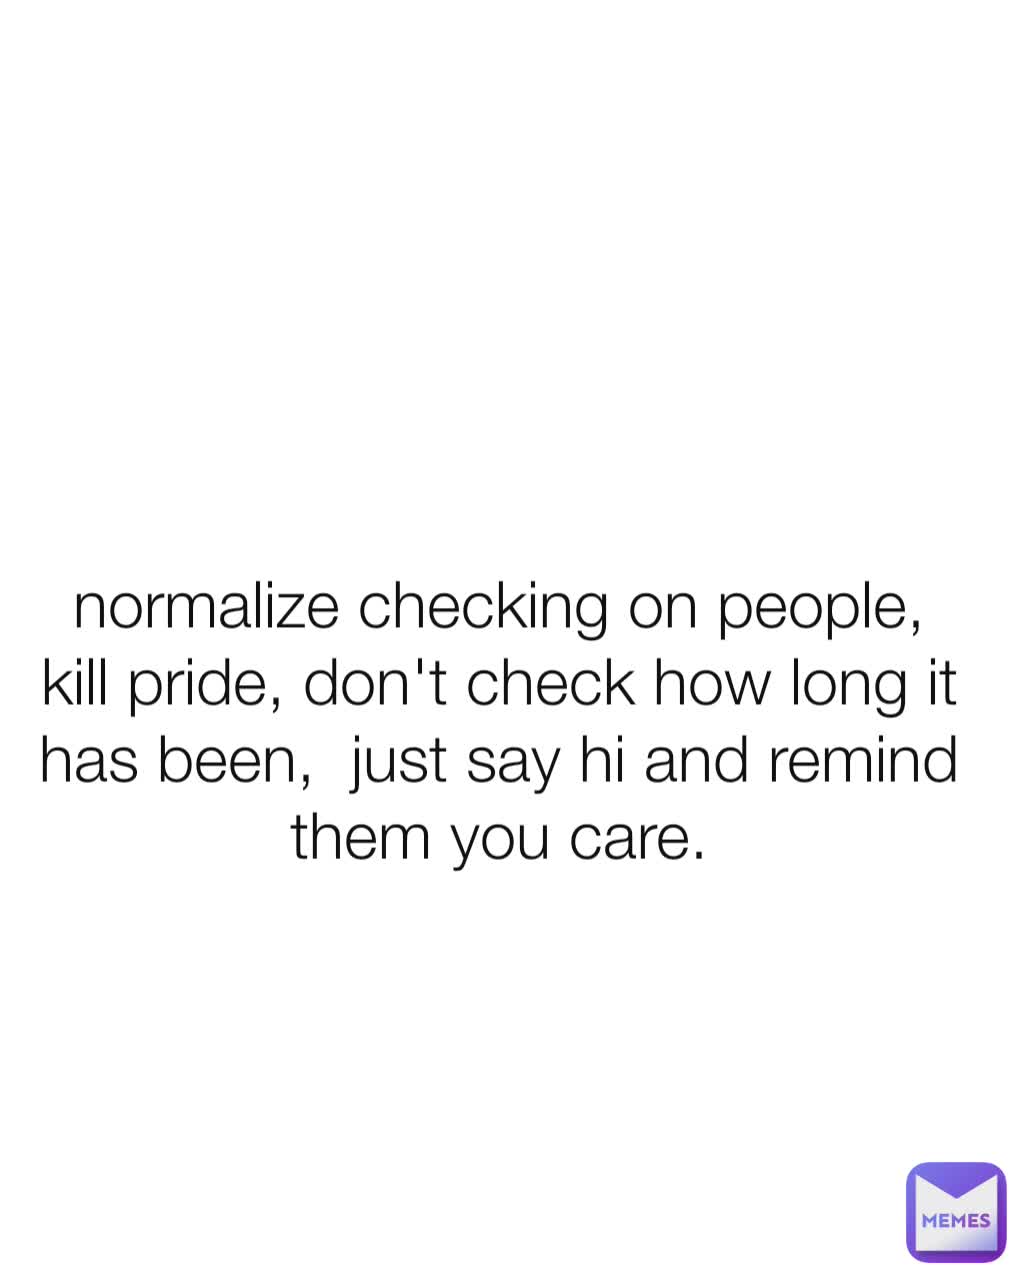 normalize checking on people,  kill pride, don't check how long it has been,  just say hi and remind them you care.